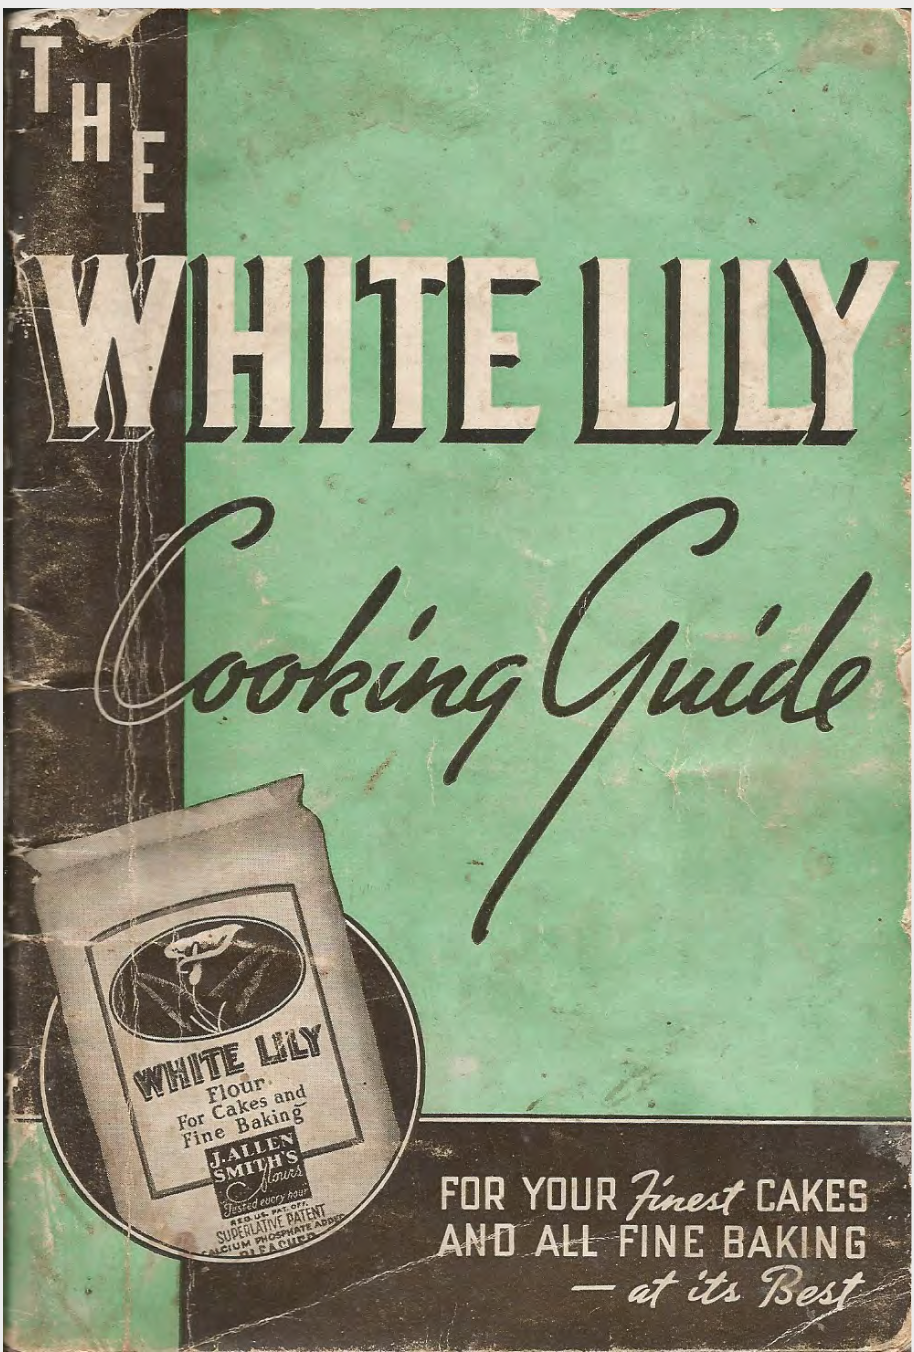 The White Lily Cooking Guide (1942)